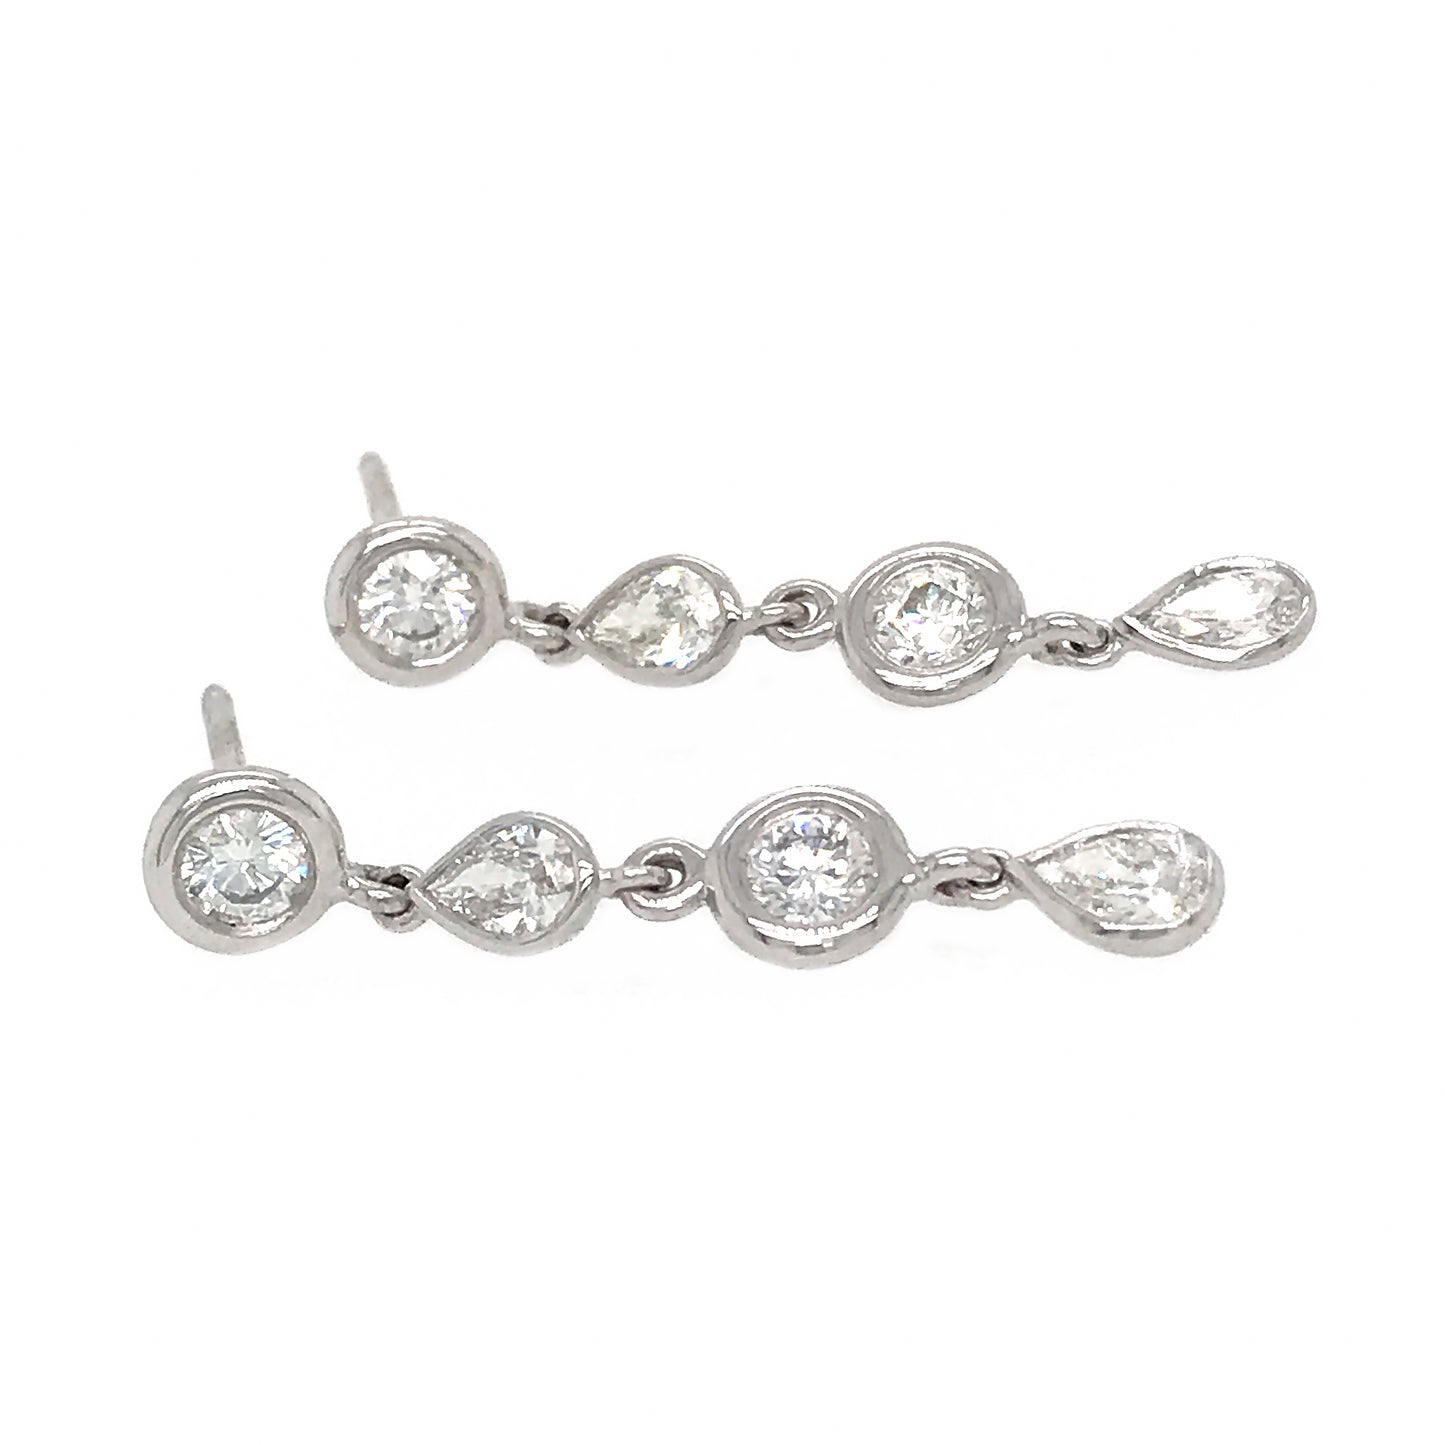 FAB DROPS 14k White Gold Round and Pear Shaped Drop Earrings